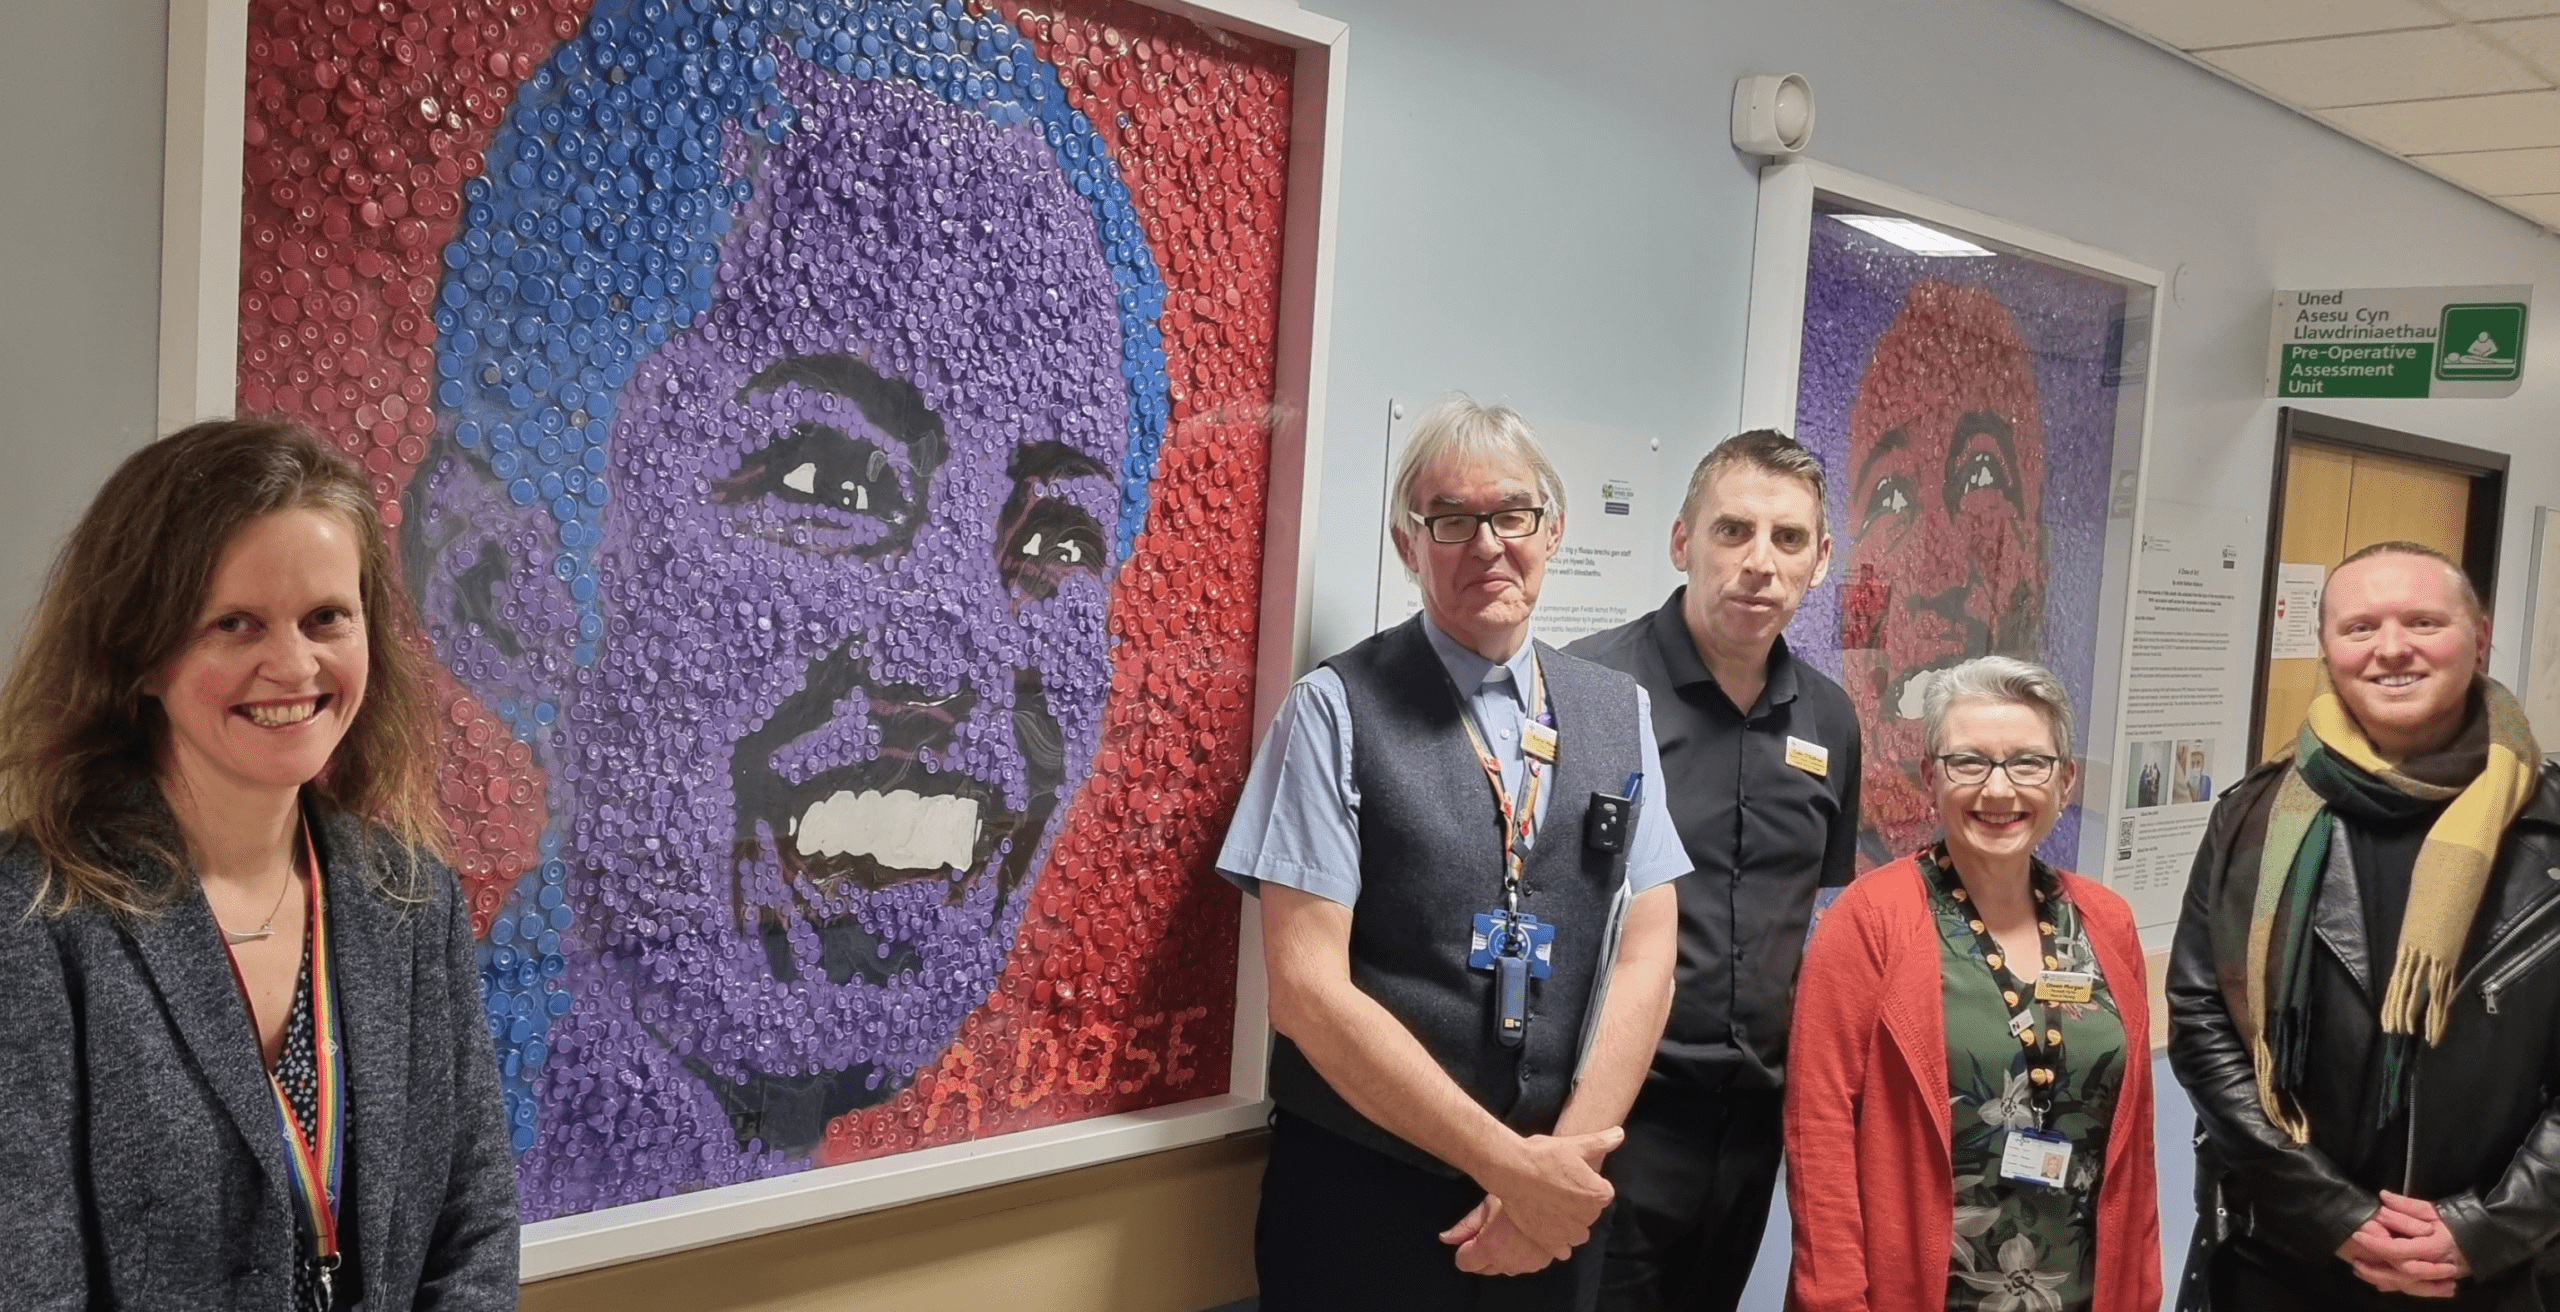 Art unveiled at Prince Philip Hospital coincides with third anniversary of first COVID-19 vaccine